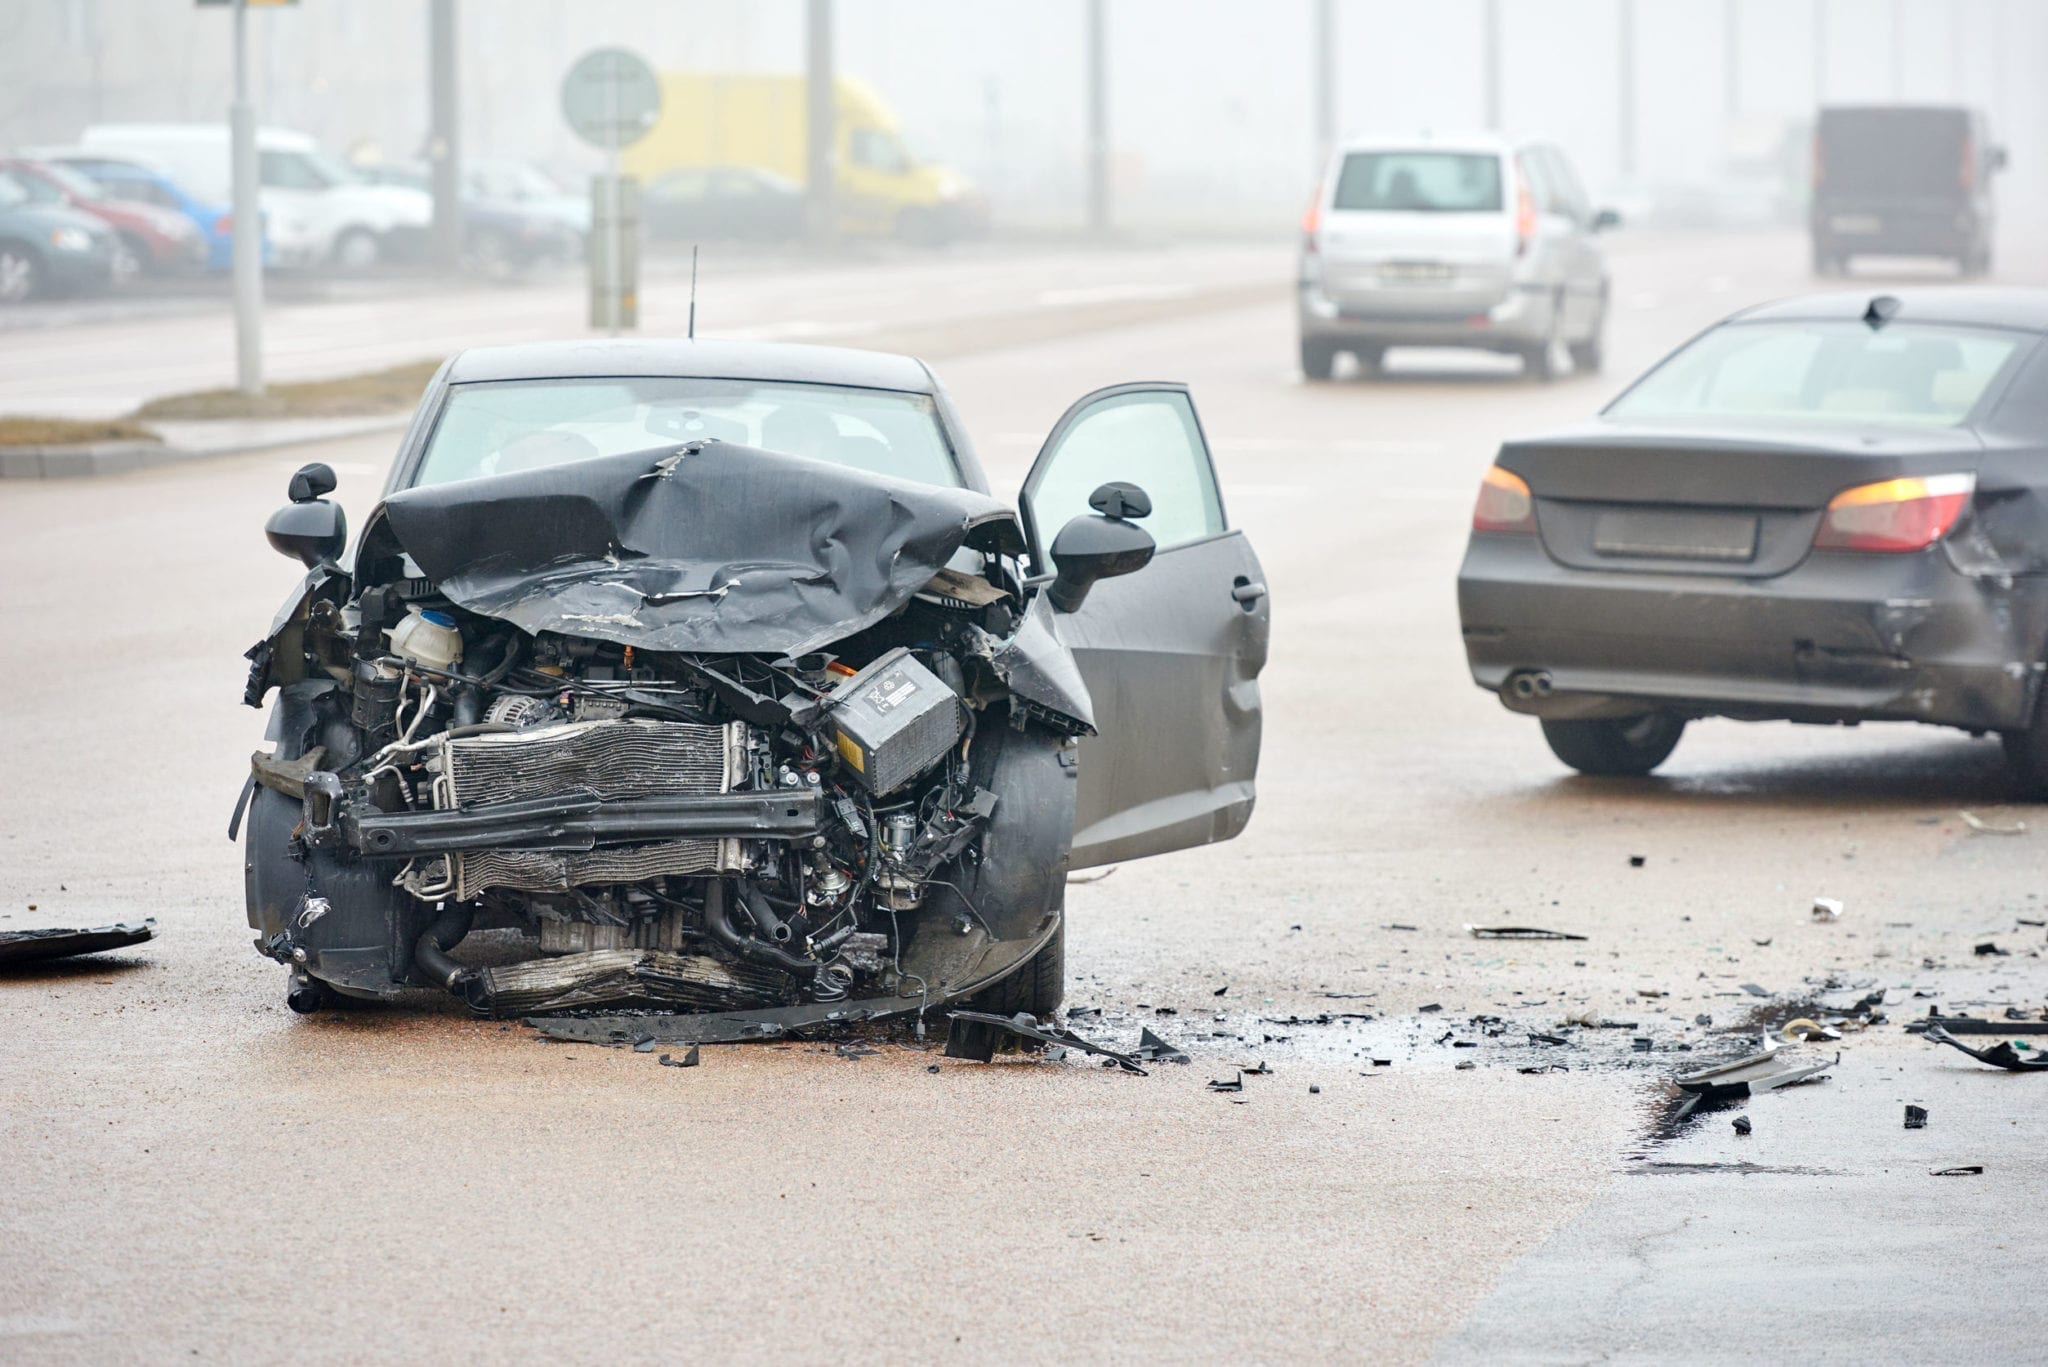 Fatal Crash: When Florida Auto Accidents Result in Deaths